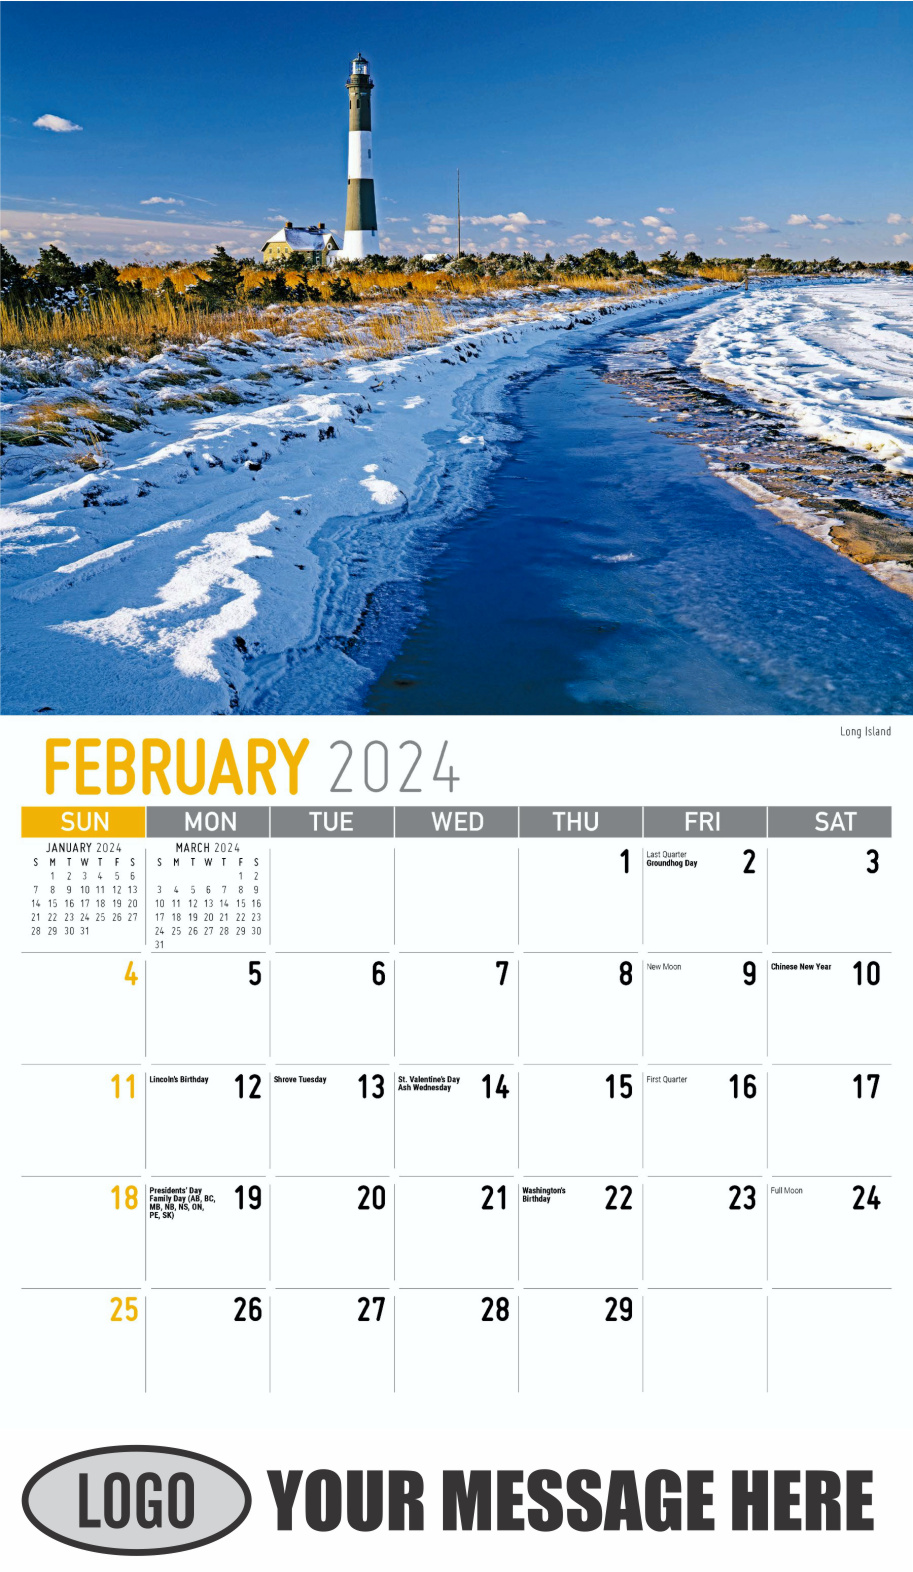 Scenes of New York 2024 Business Promotional Wall Calendar - February